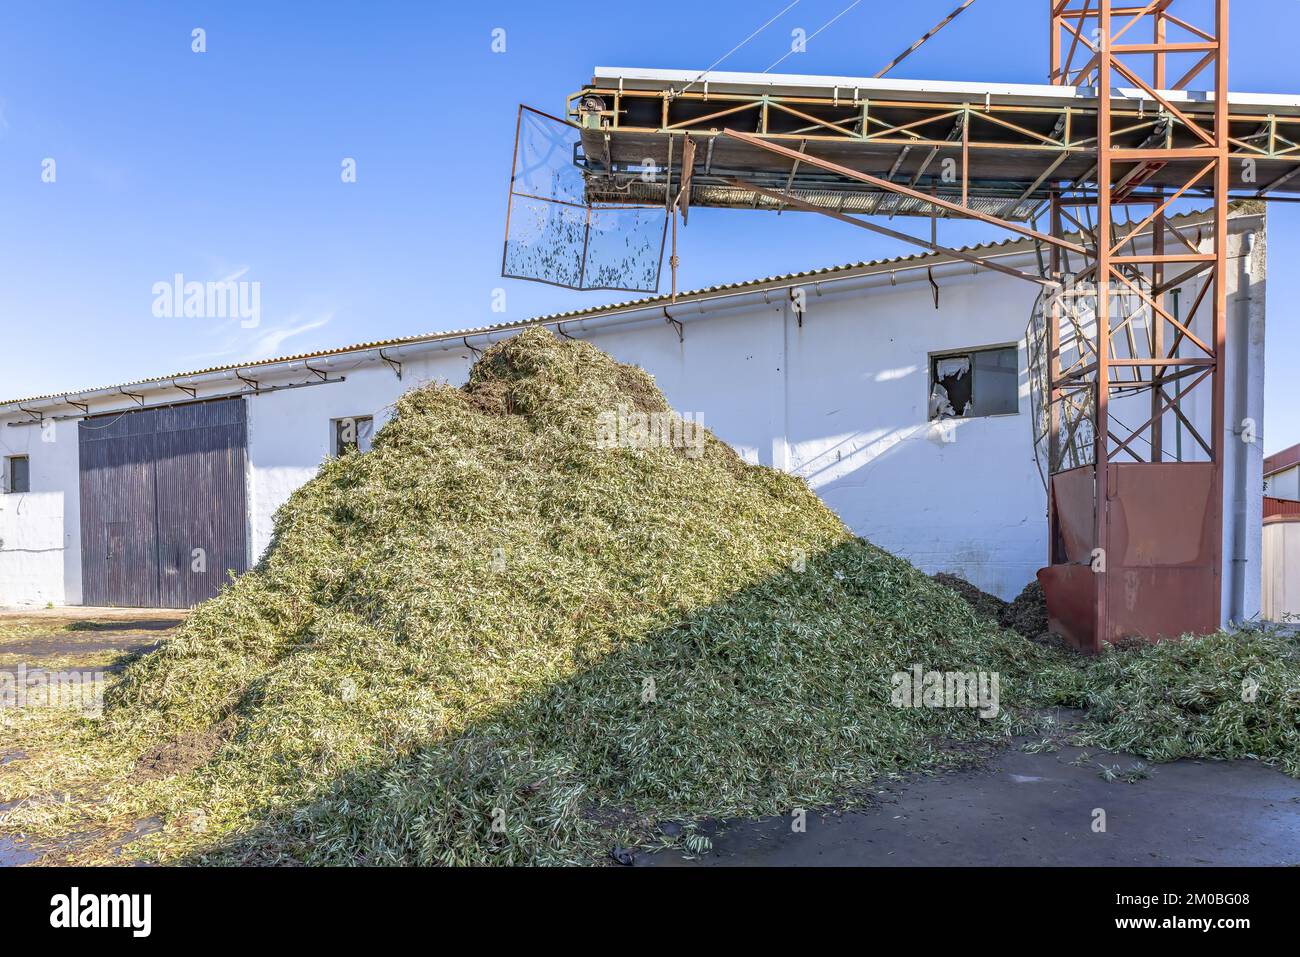 Pile of waste olive leaves and branches from the production of olive oil in an oil mill Stock Photo